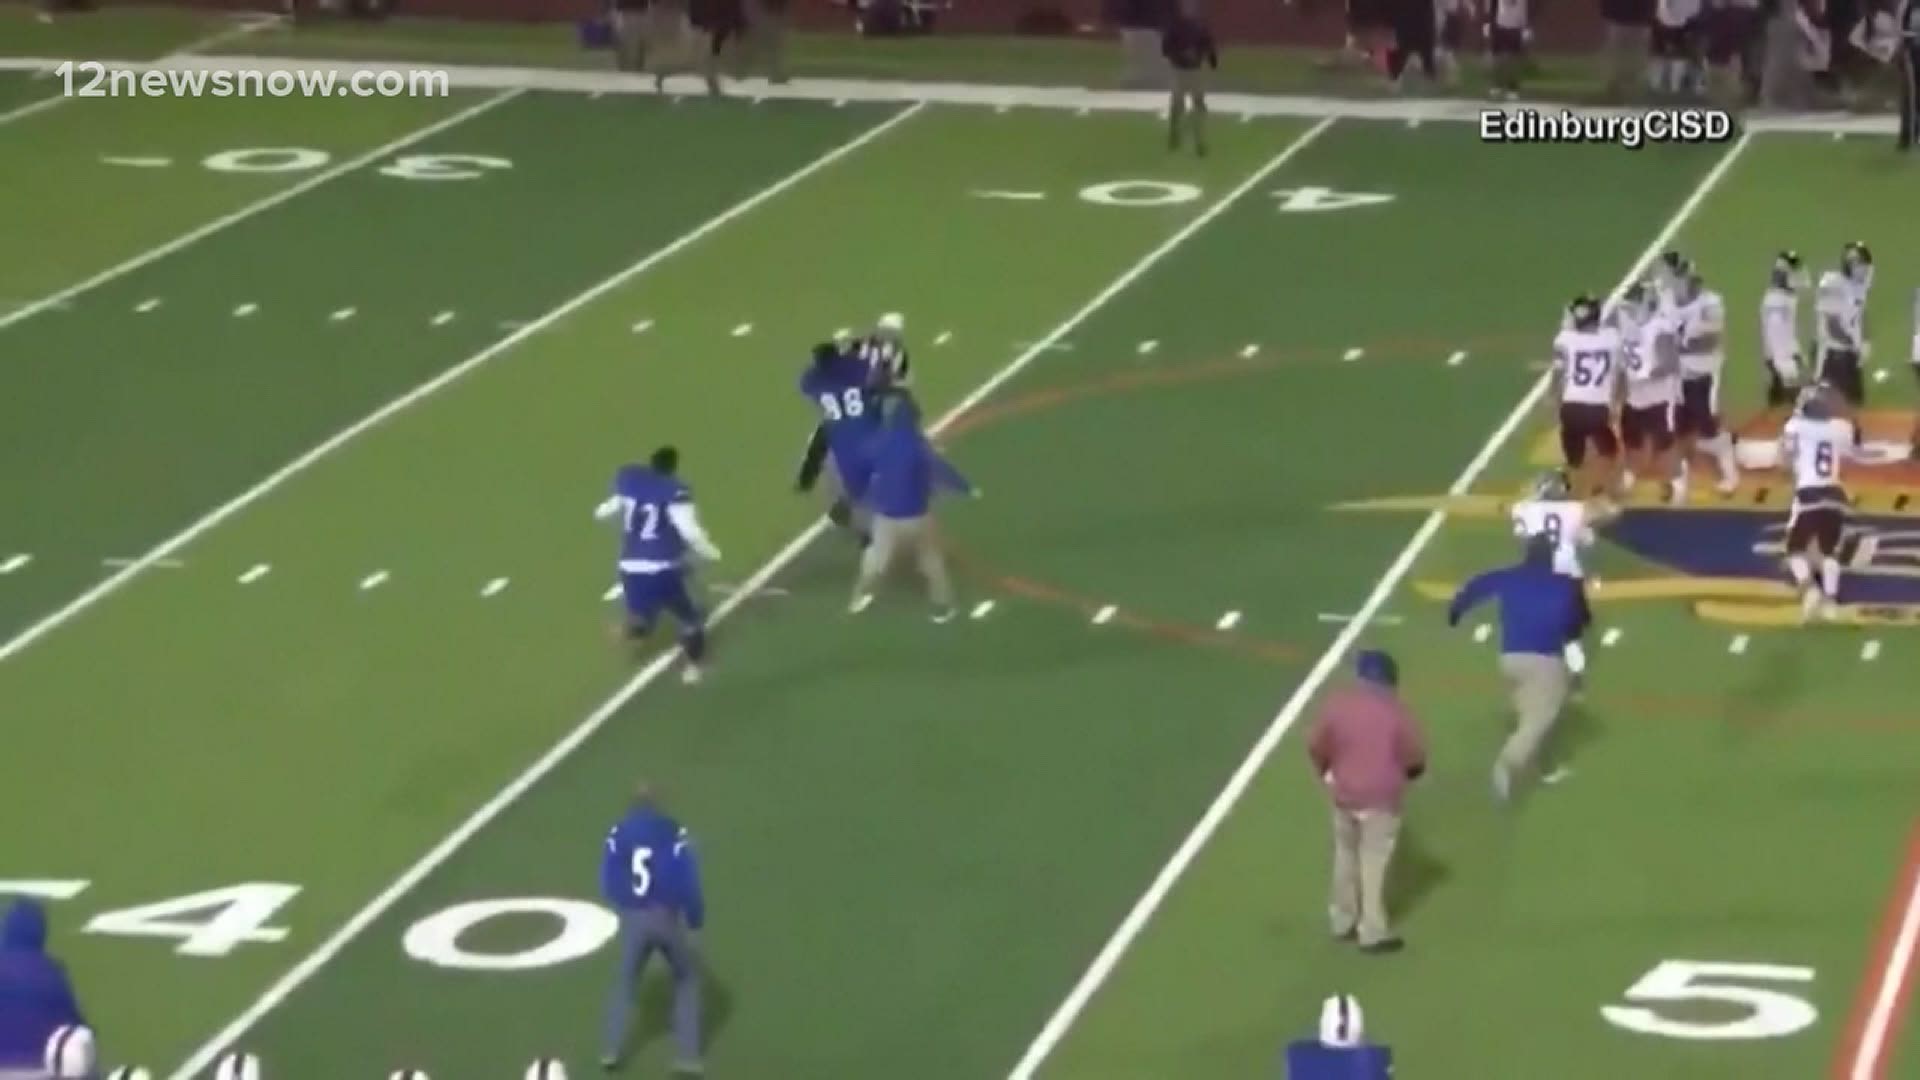 A South Texas high school football player is facing assault charges after tackling a referee during a game Thursday night.